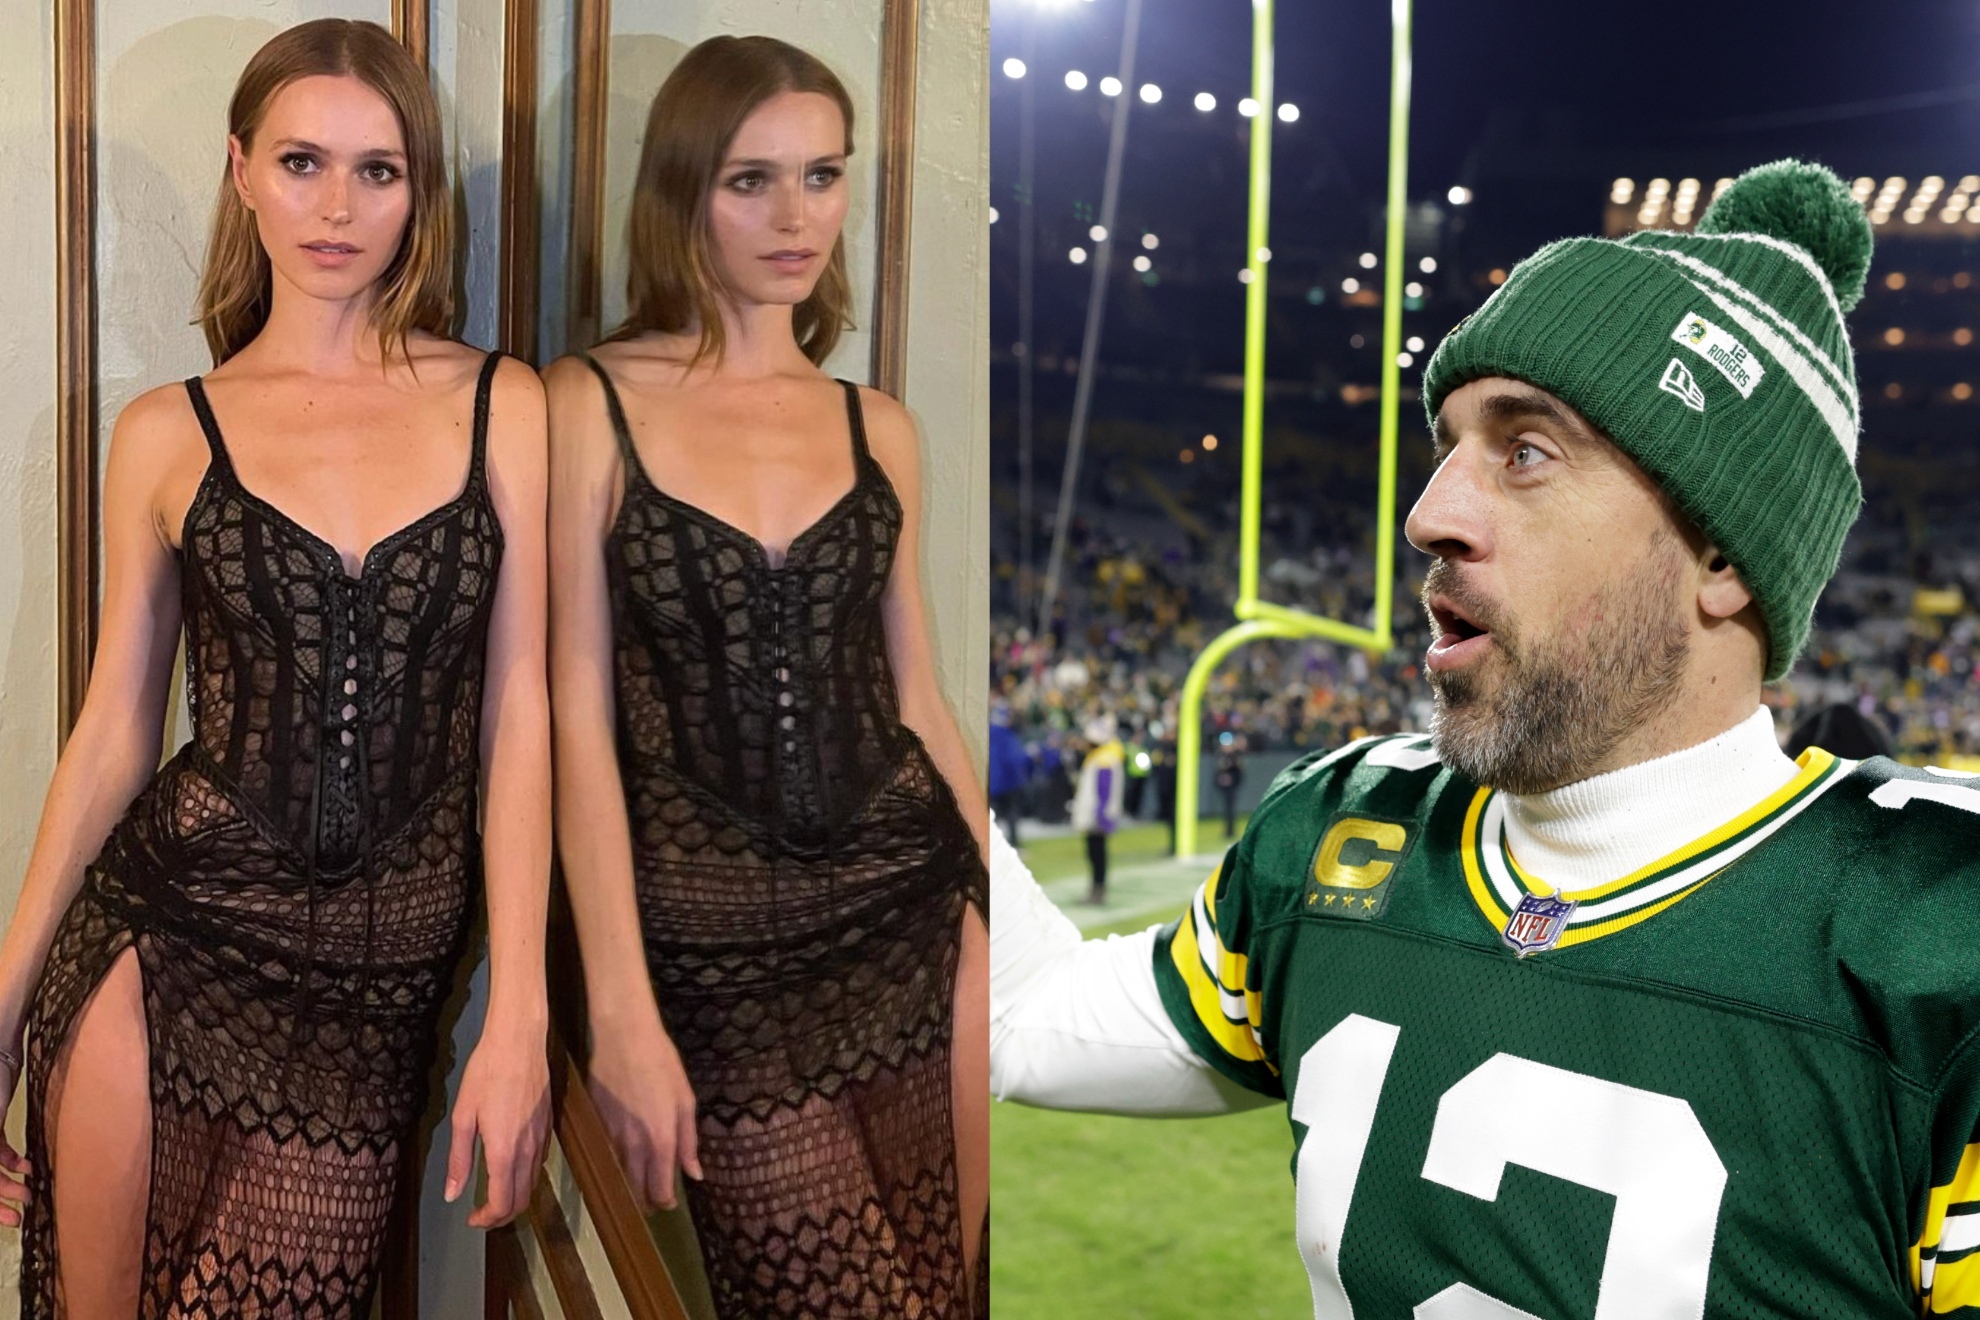 After his season-ending injury, Mallory Edens, Aaron Rodgers’ rumored girlfriend, sent her love